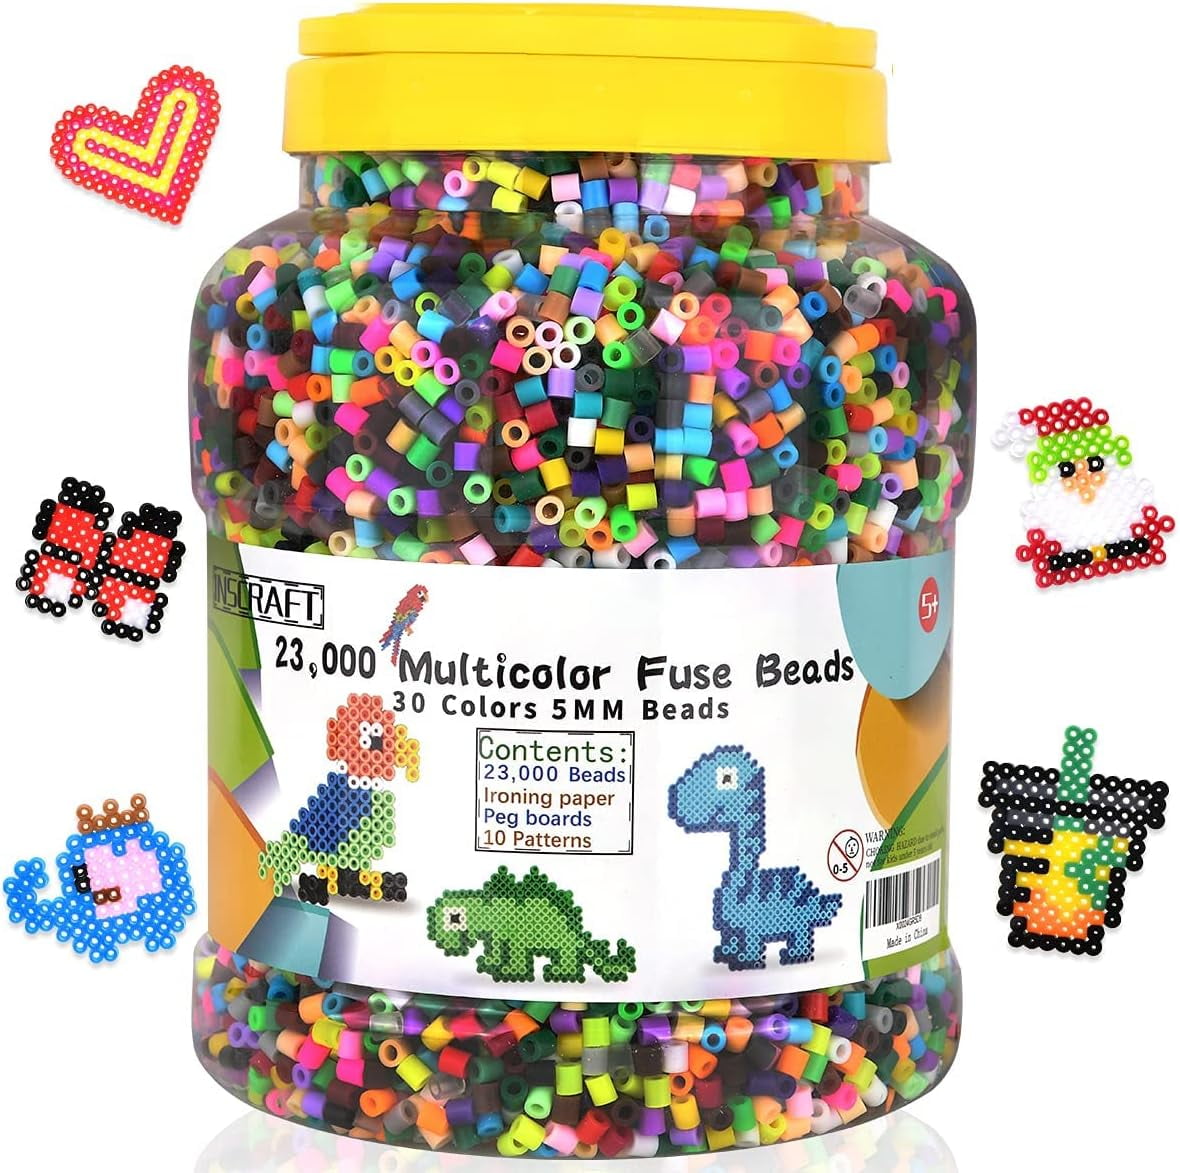 Austok 2.6mm Fuse Beads Kit,15000-16000Pcs 24 Colors Art Crafting Melting  Beads Puzzle Magic,DIY Art Craft Toys for Kids with Pegboards Ironing Paper